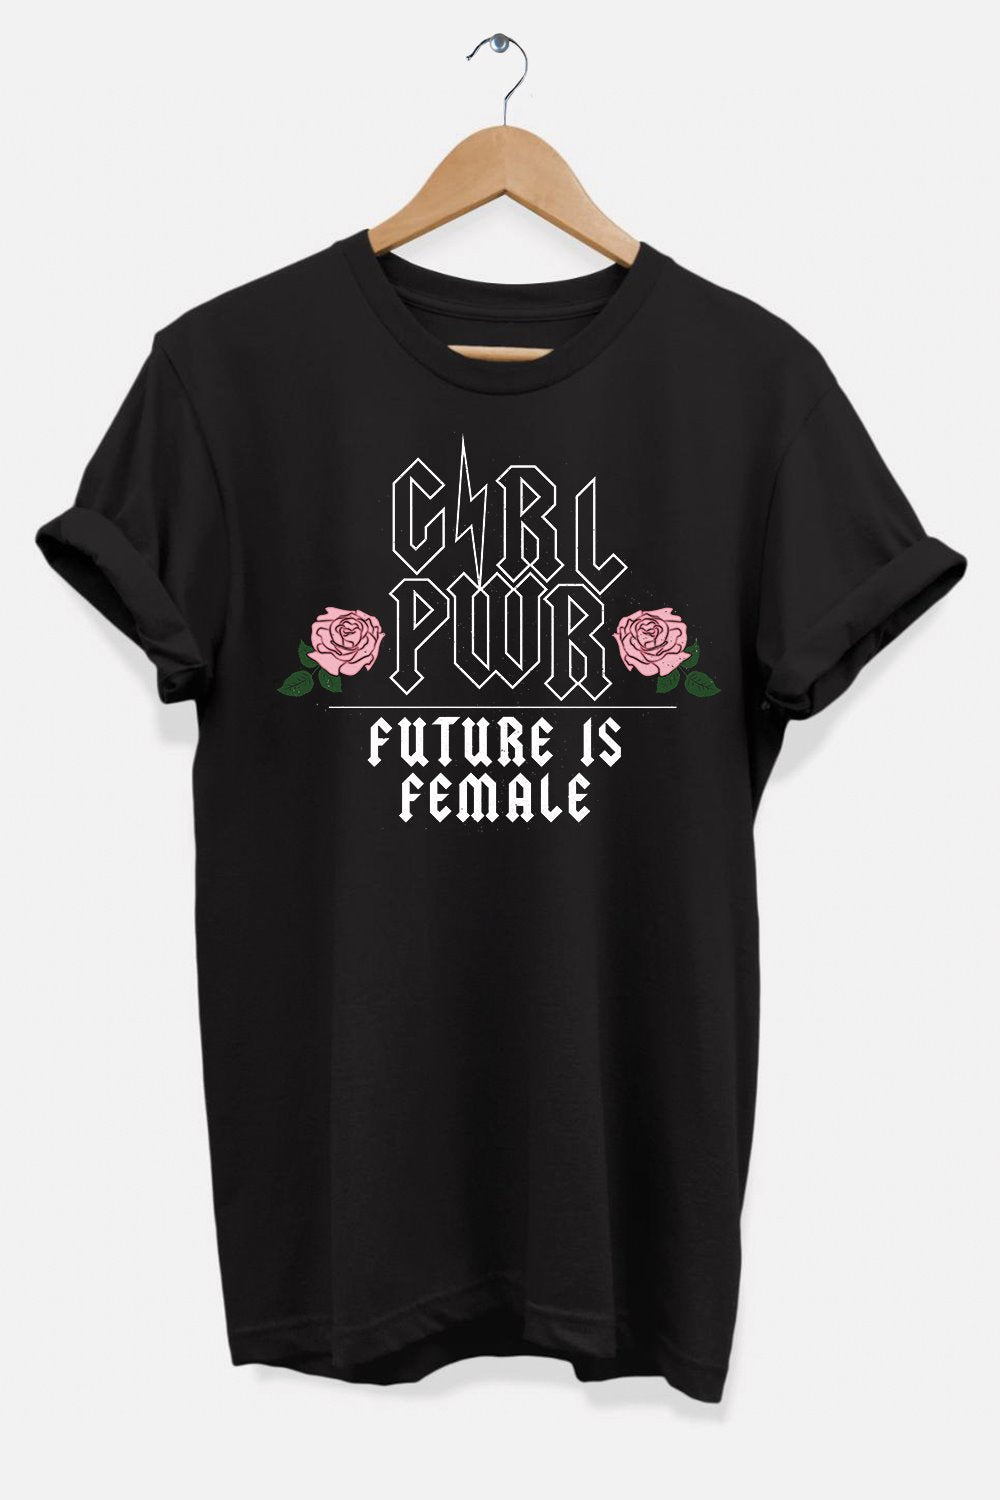 GIRL PWR Future is Female T-Shirt